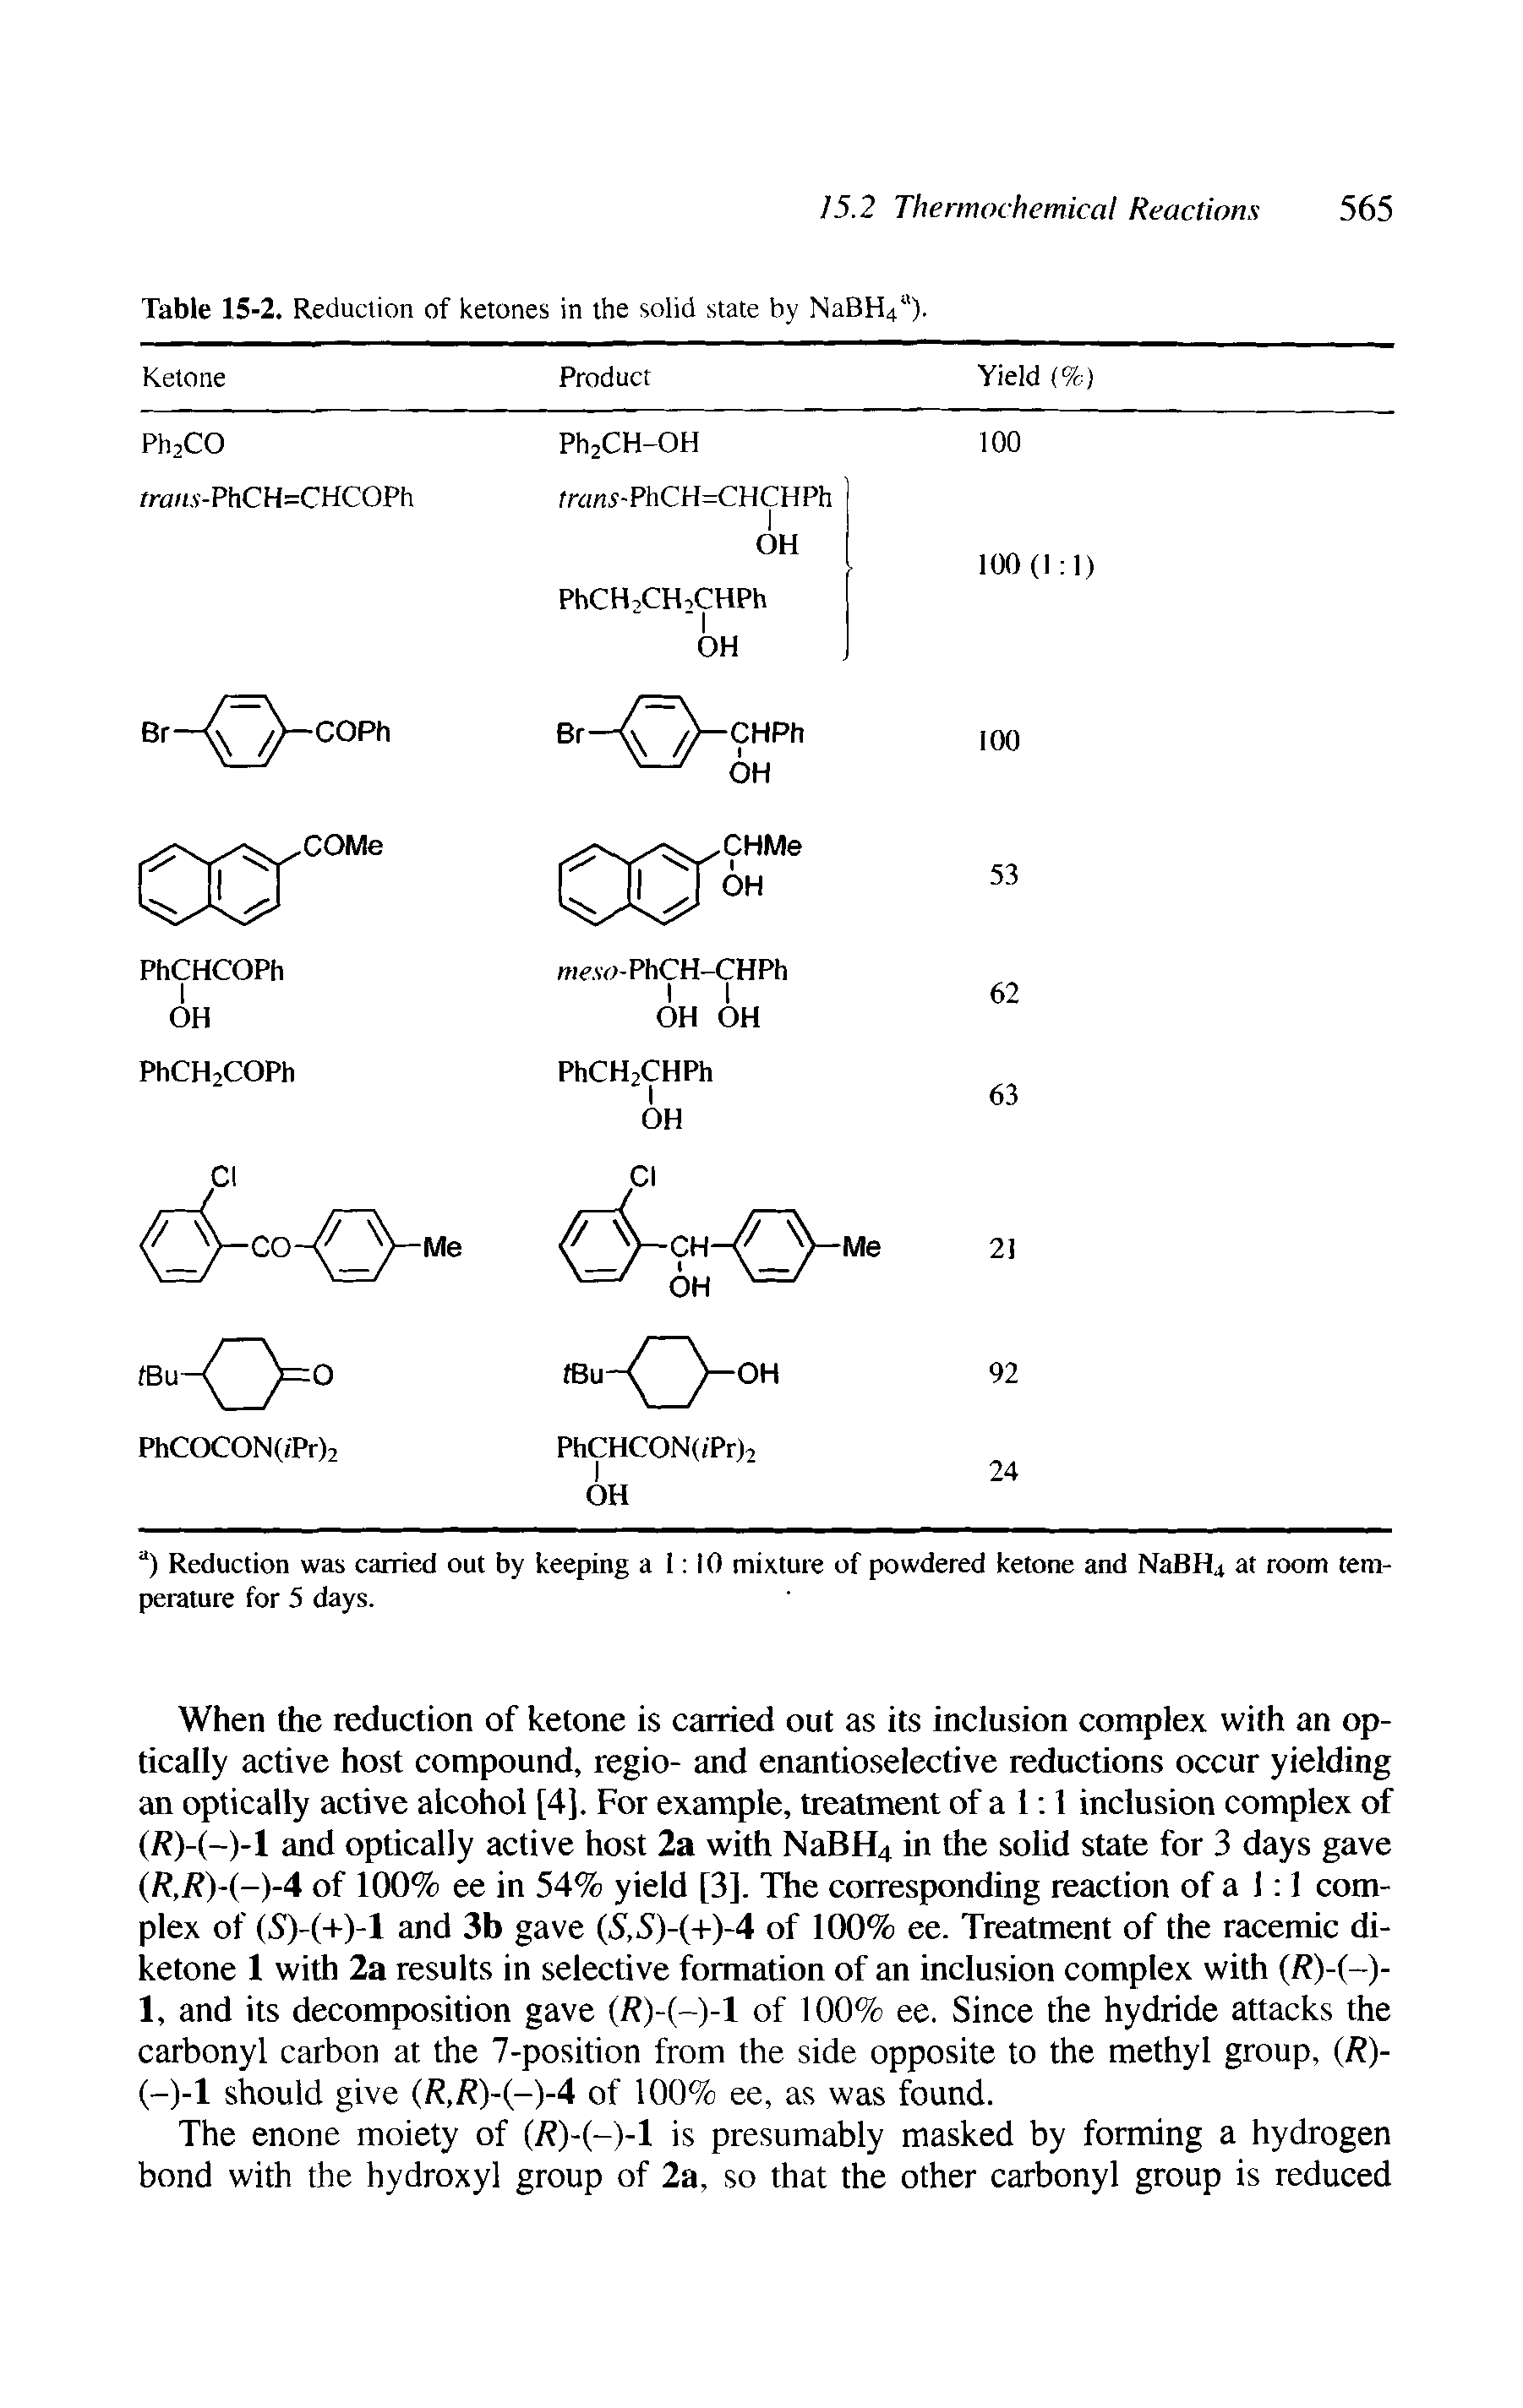 Table 15-2. Reduclion of ketones in the solid state by NaBH4 ).